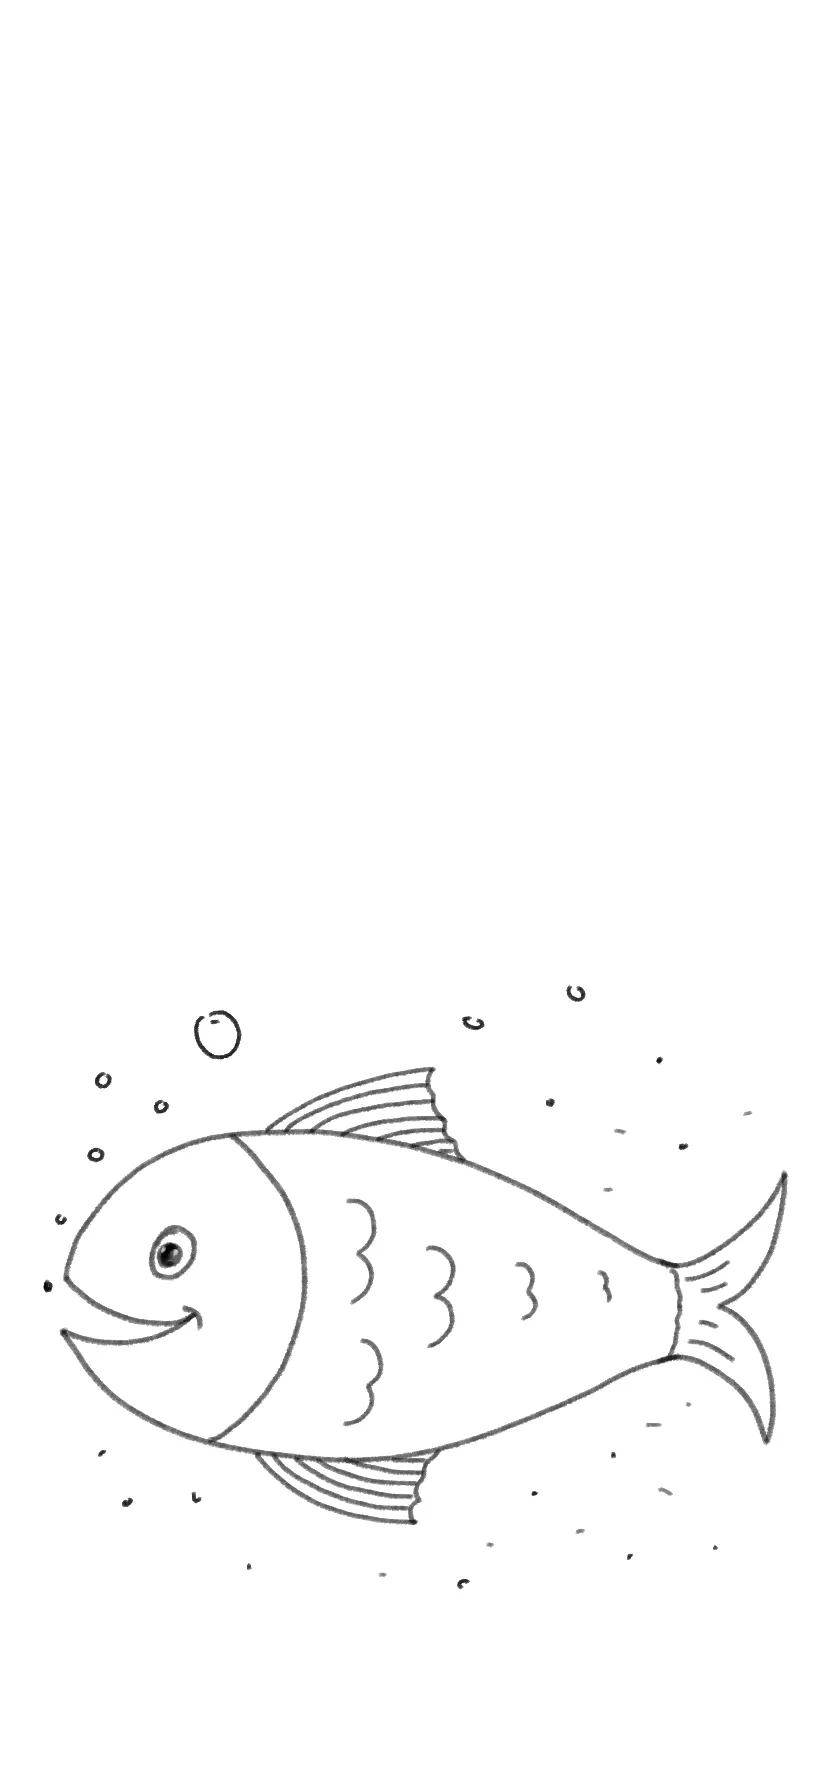 Pinterest | Fish drawing for kids, Drawing lessons for kids, Drawing lessons-saigonsouth.com.vn